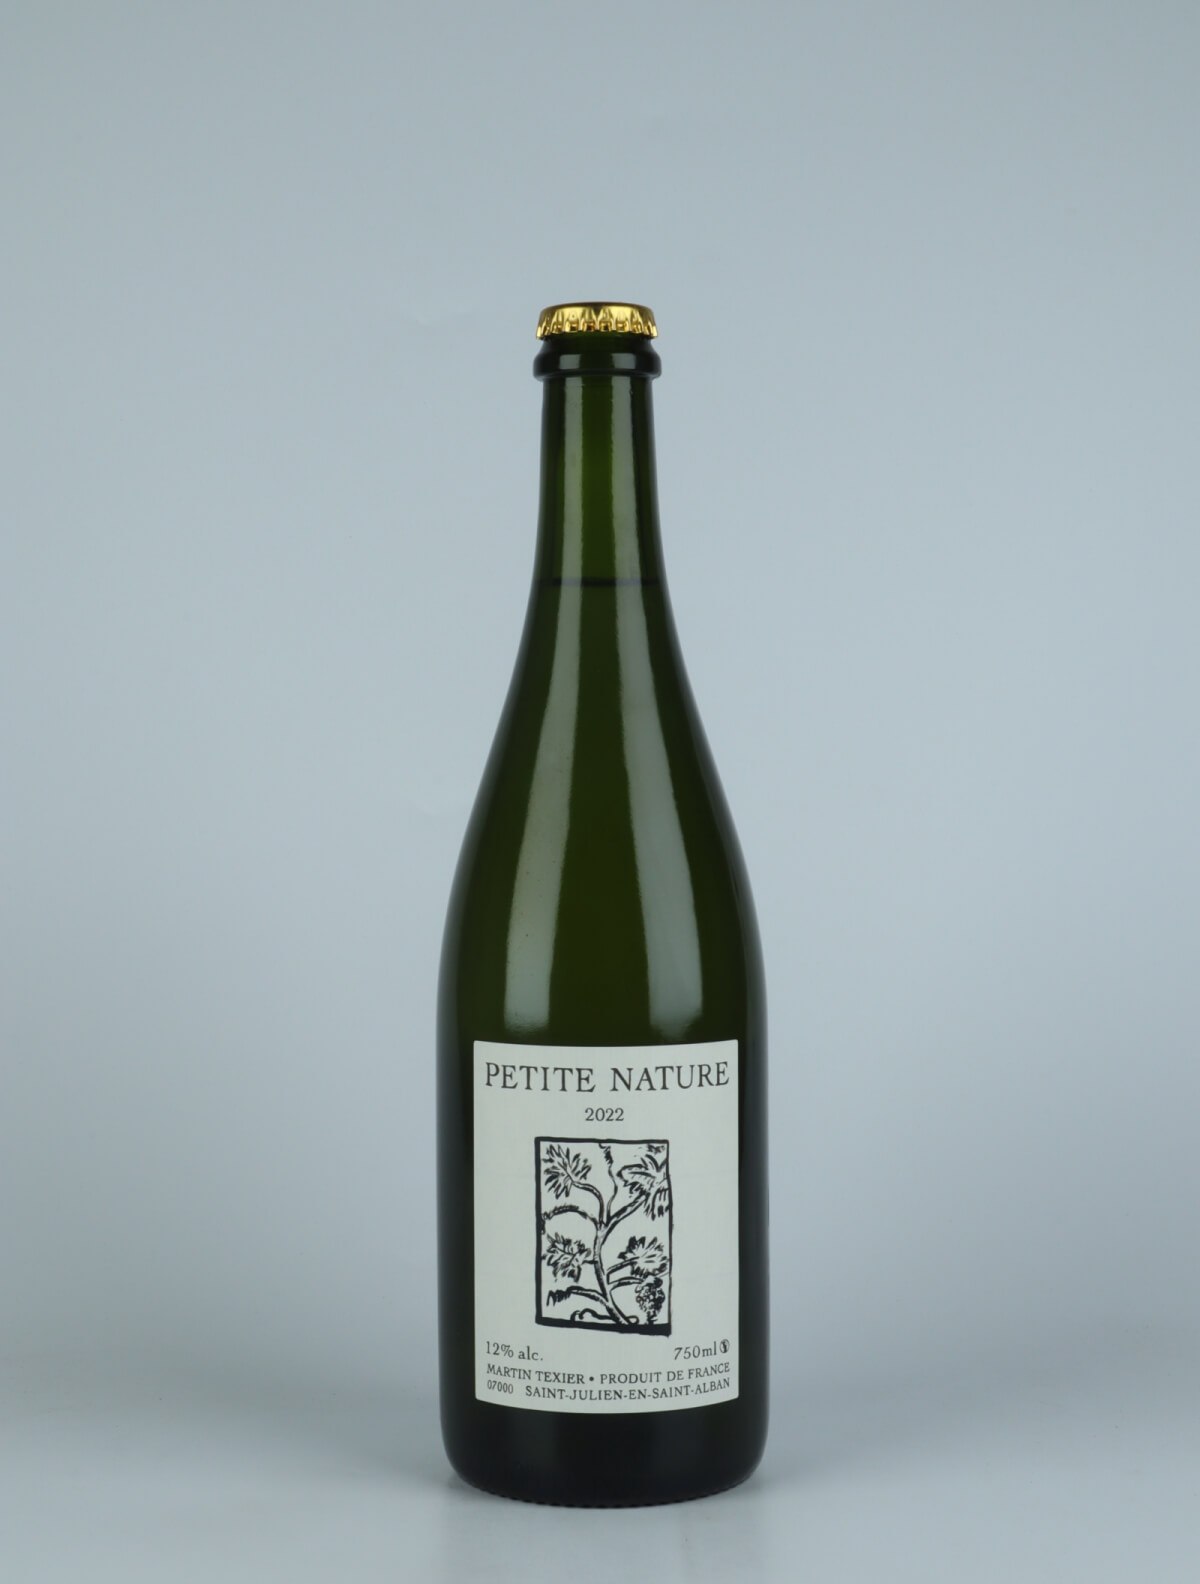 A bottle 2022 Petite Nature Sparkling from Martin Texier, Rhône in France